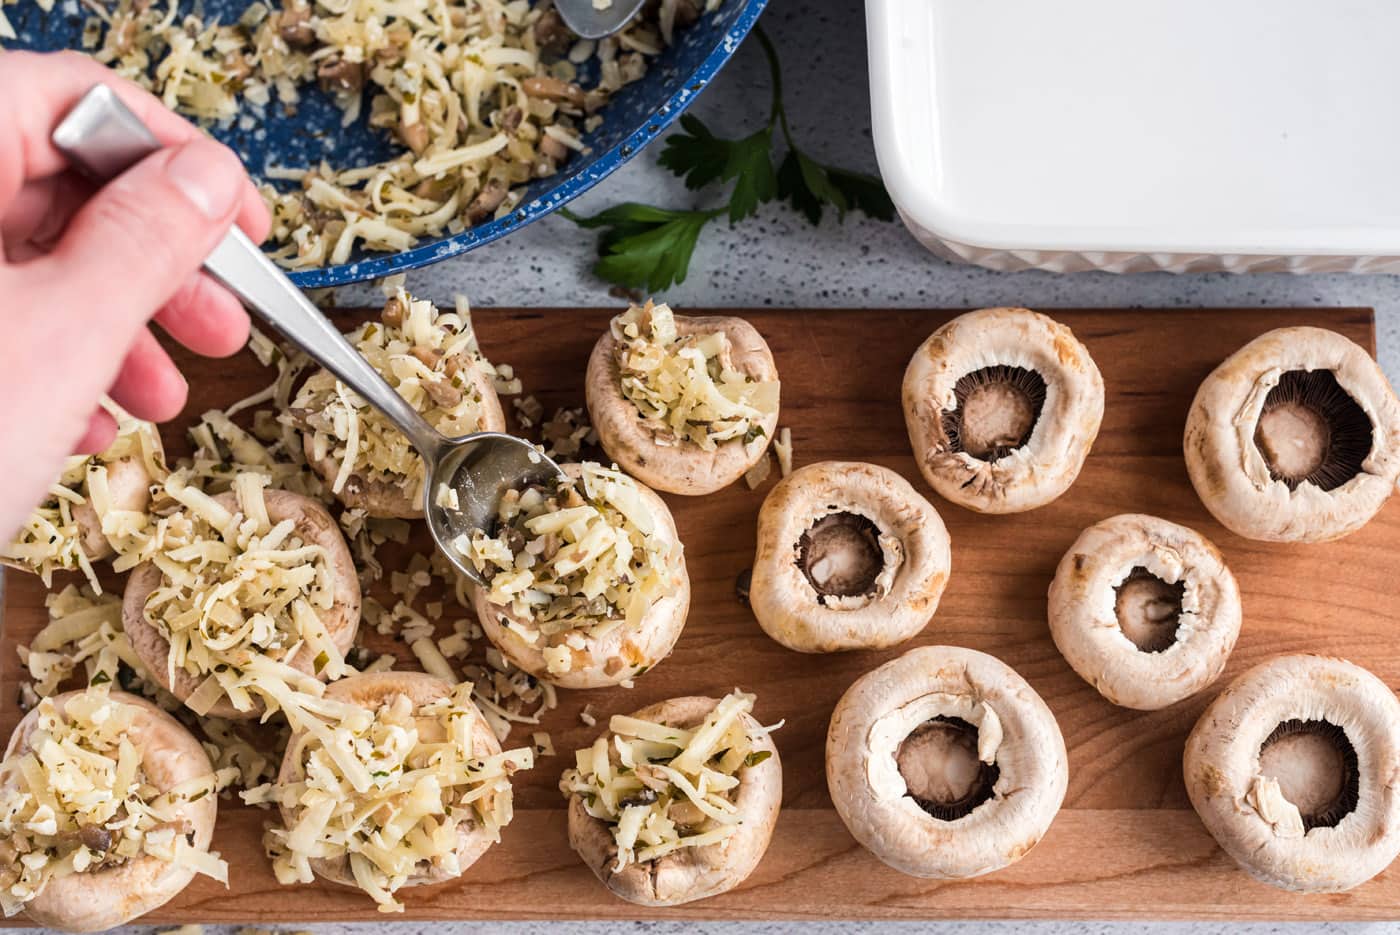 stuffing mushroom caps with cheese mixture